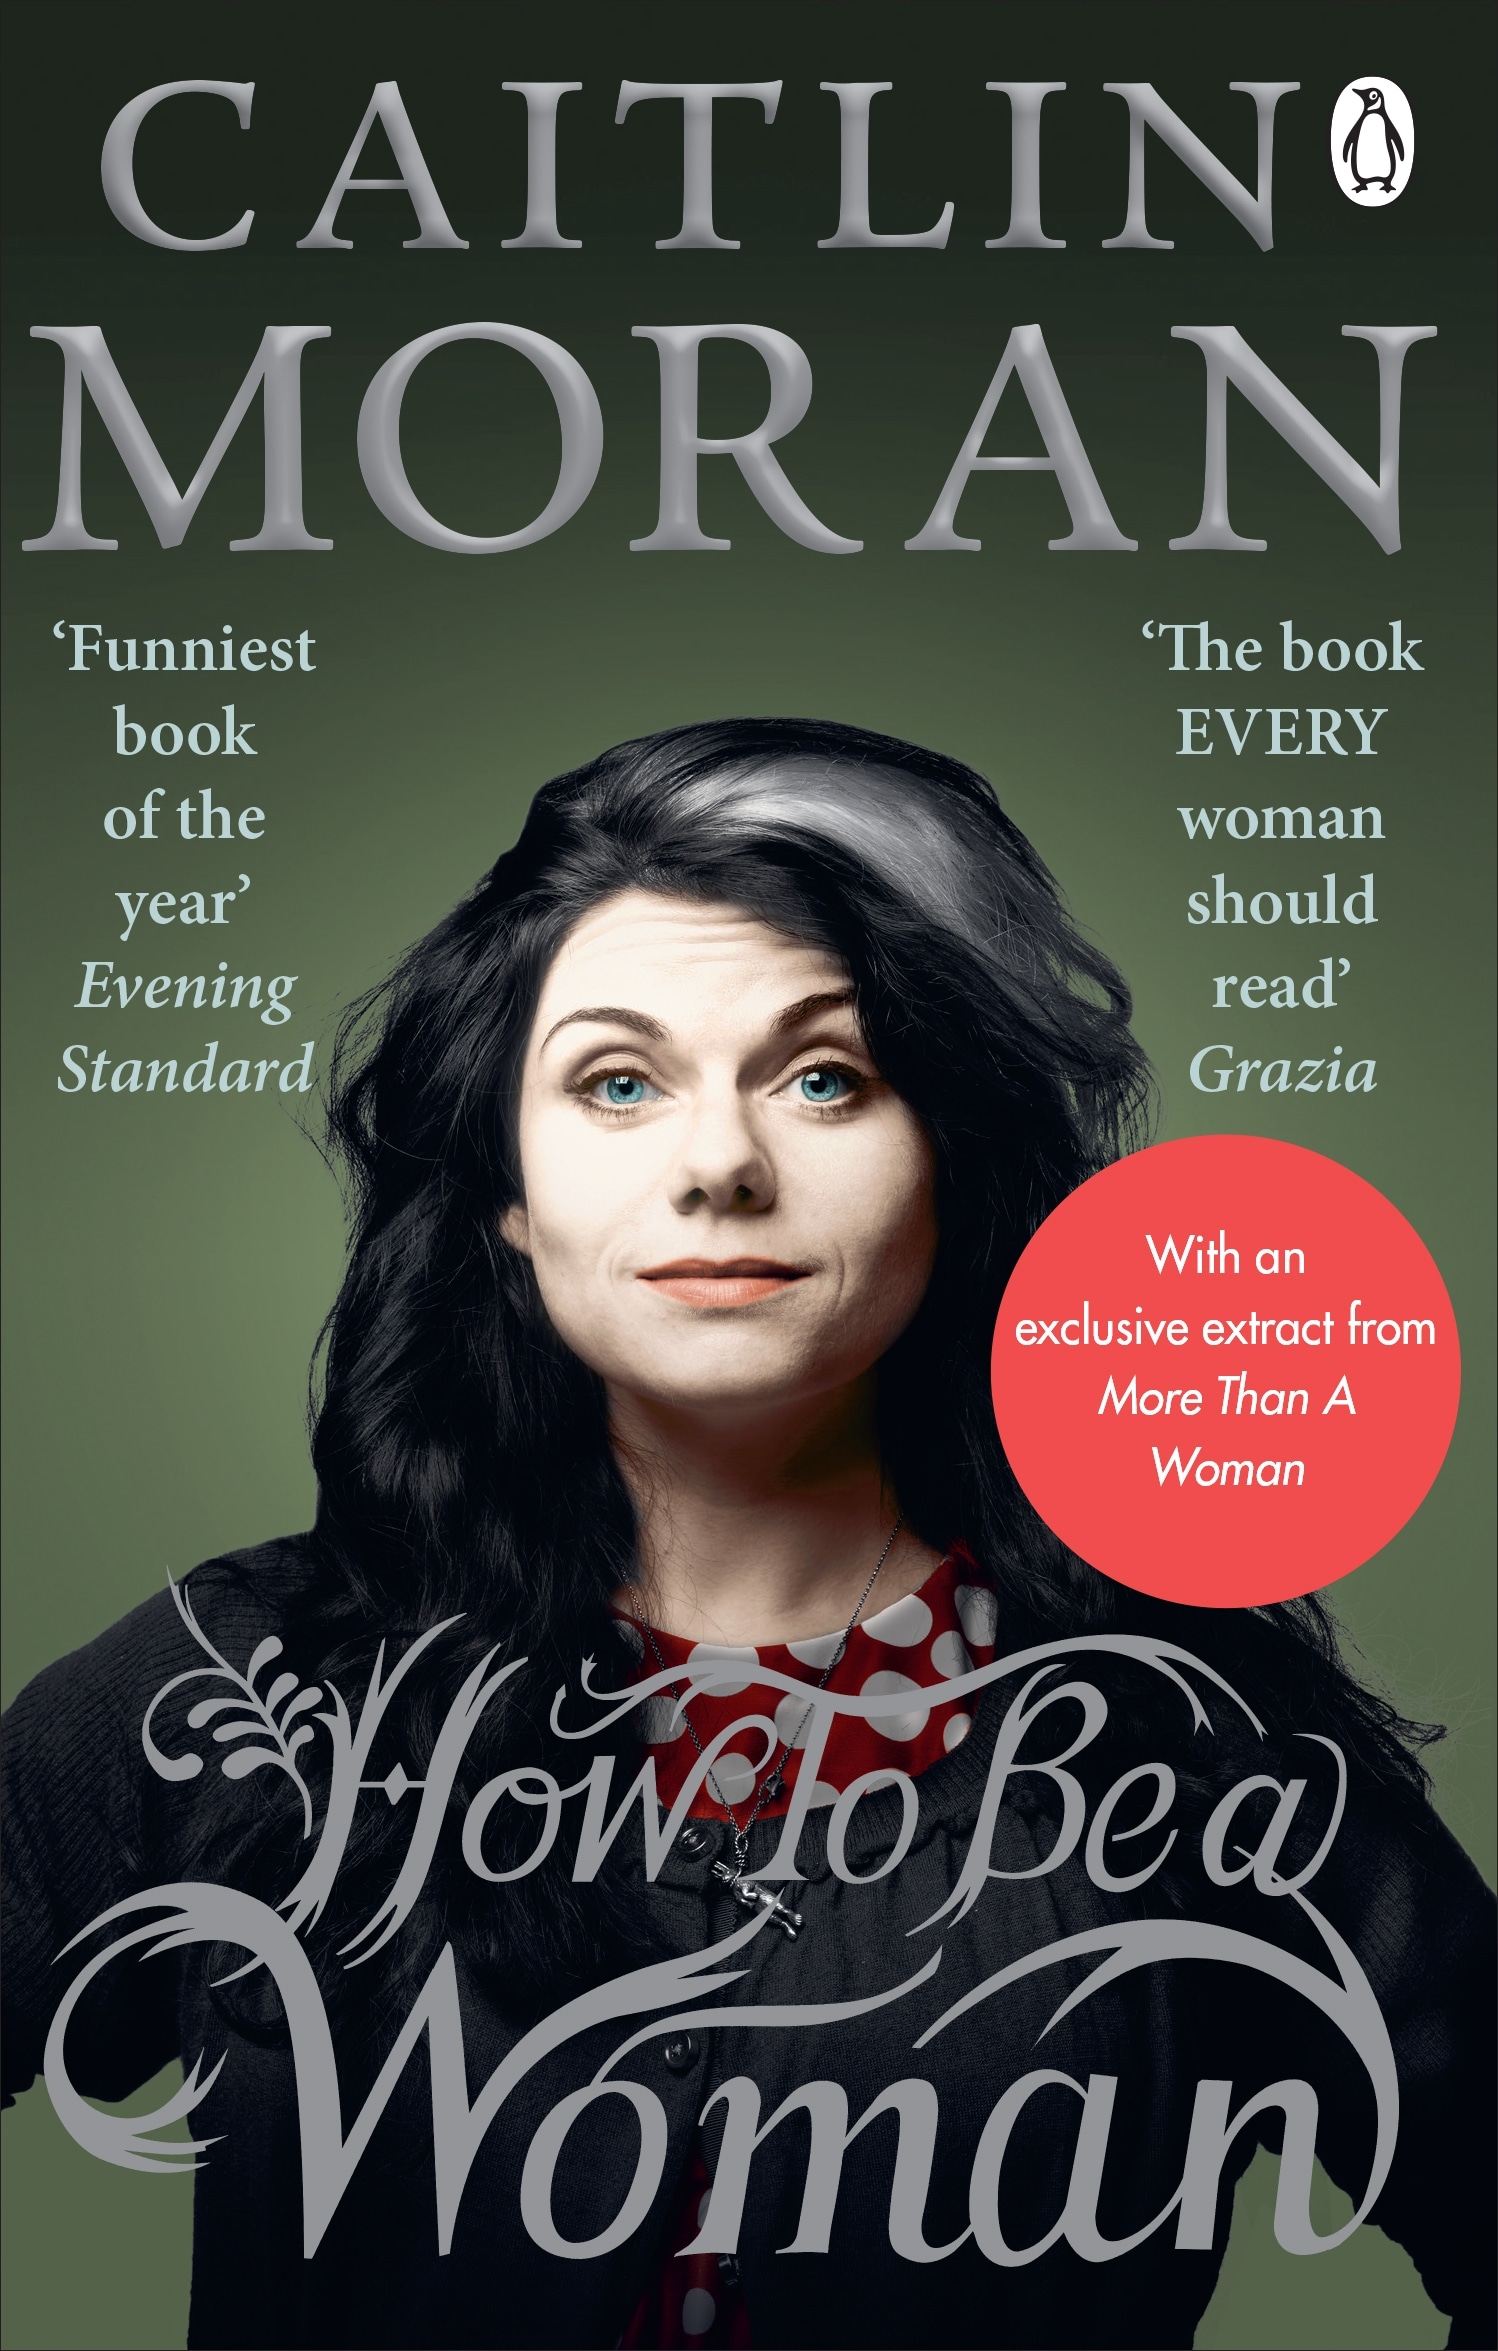 Book “How To Be a Woman” by Caitlin Moran — March 1, 2012